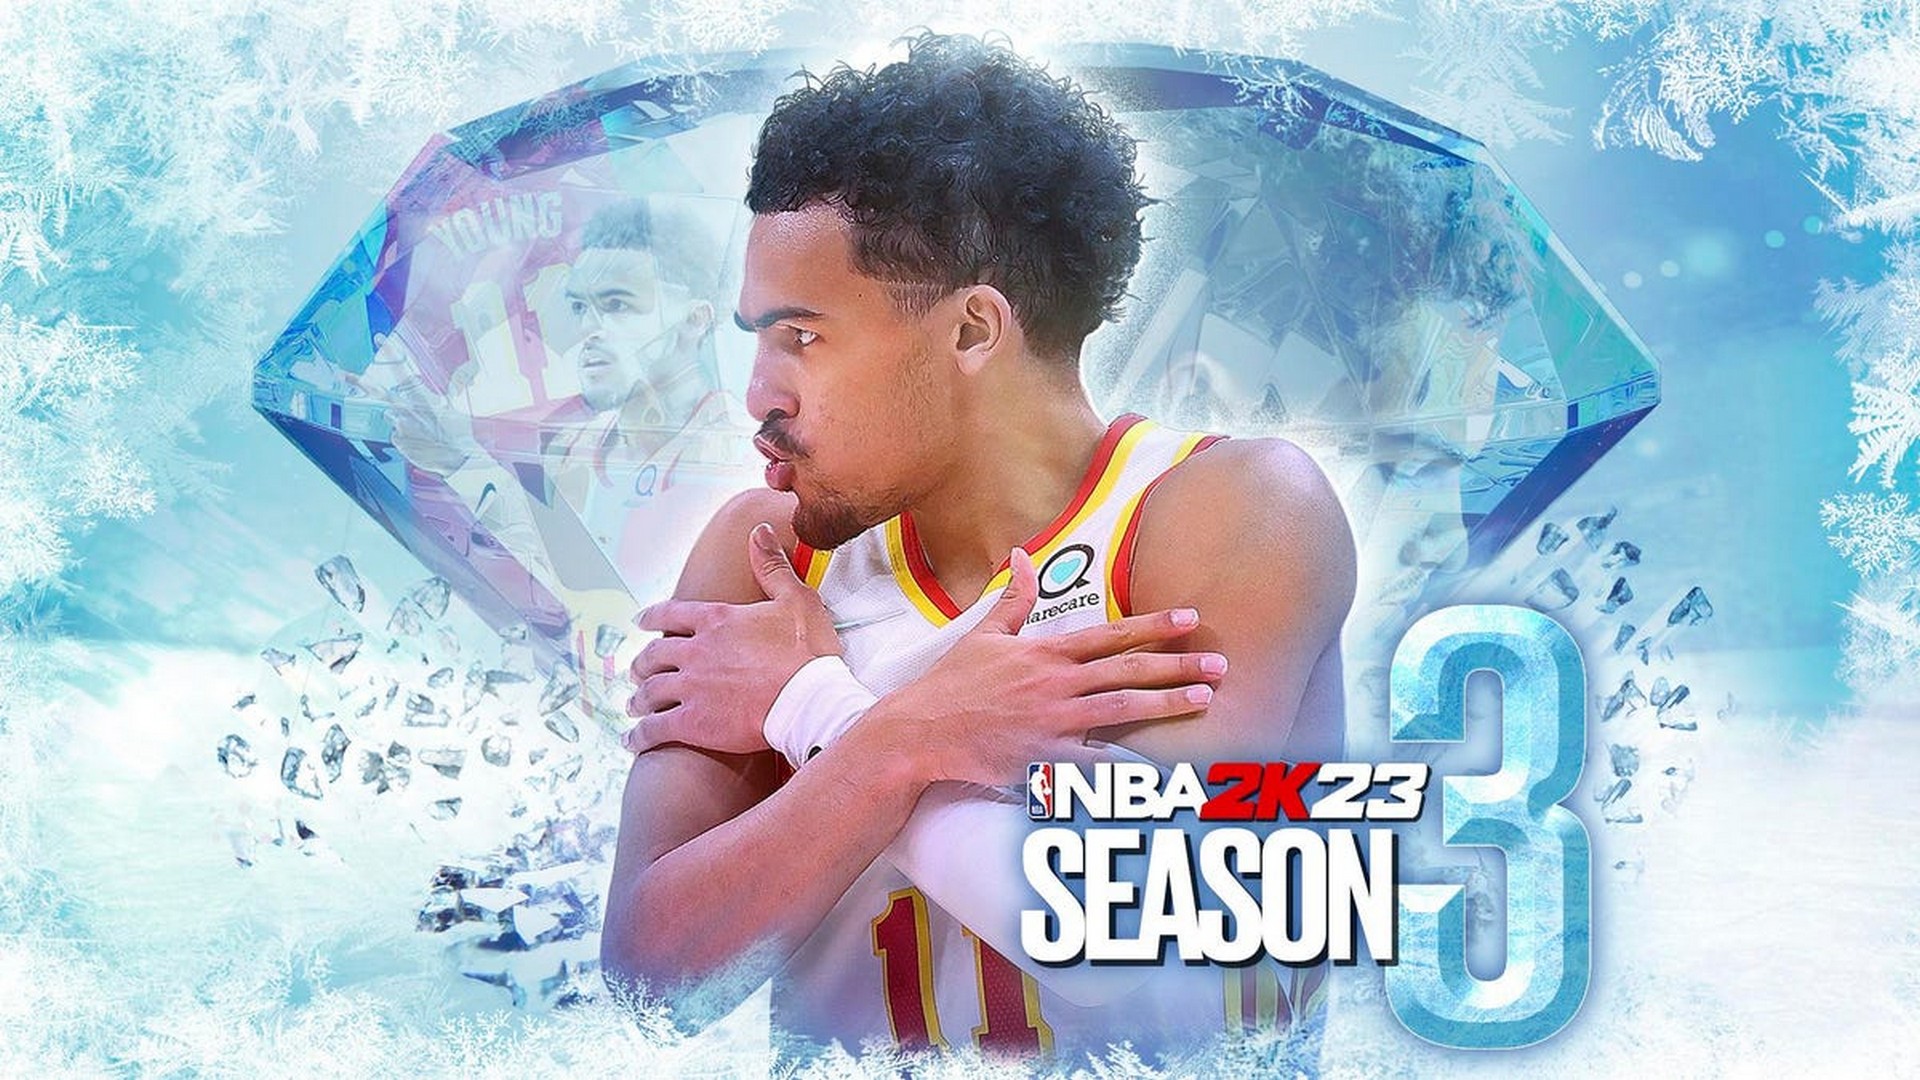 NBA 2K23 Season 3: Winter Comes To The Court Starting December 2